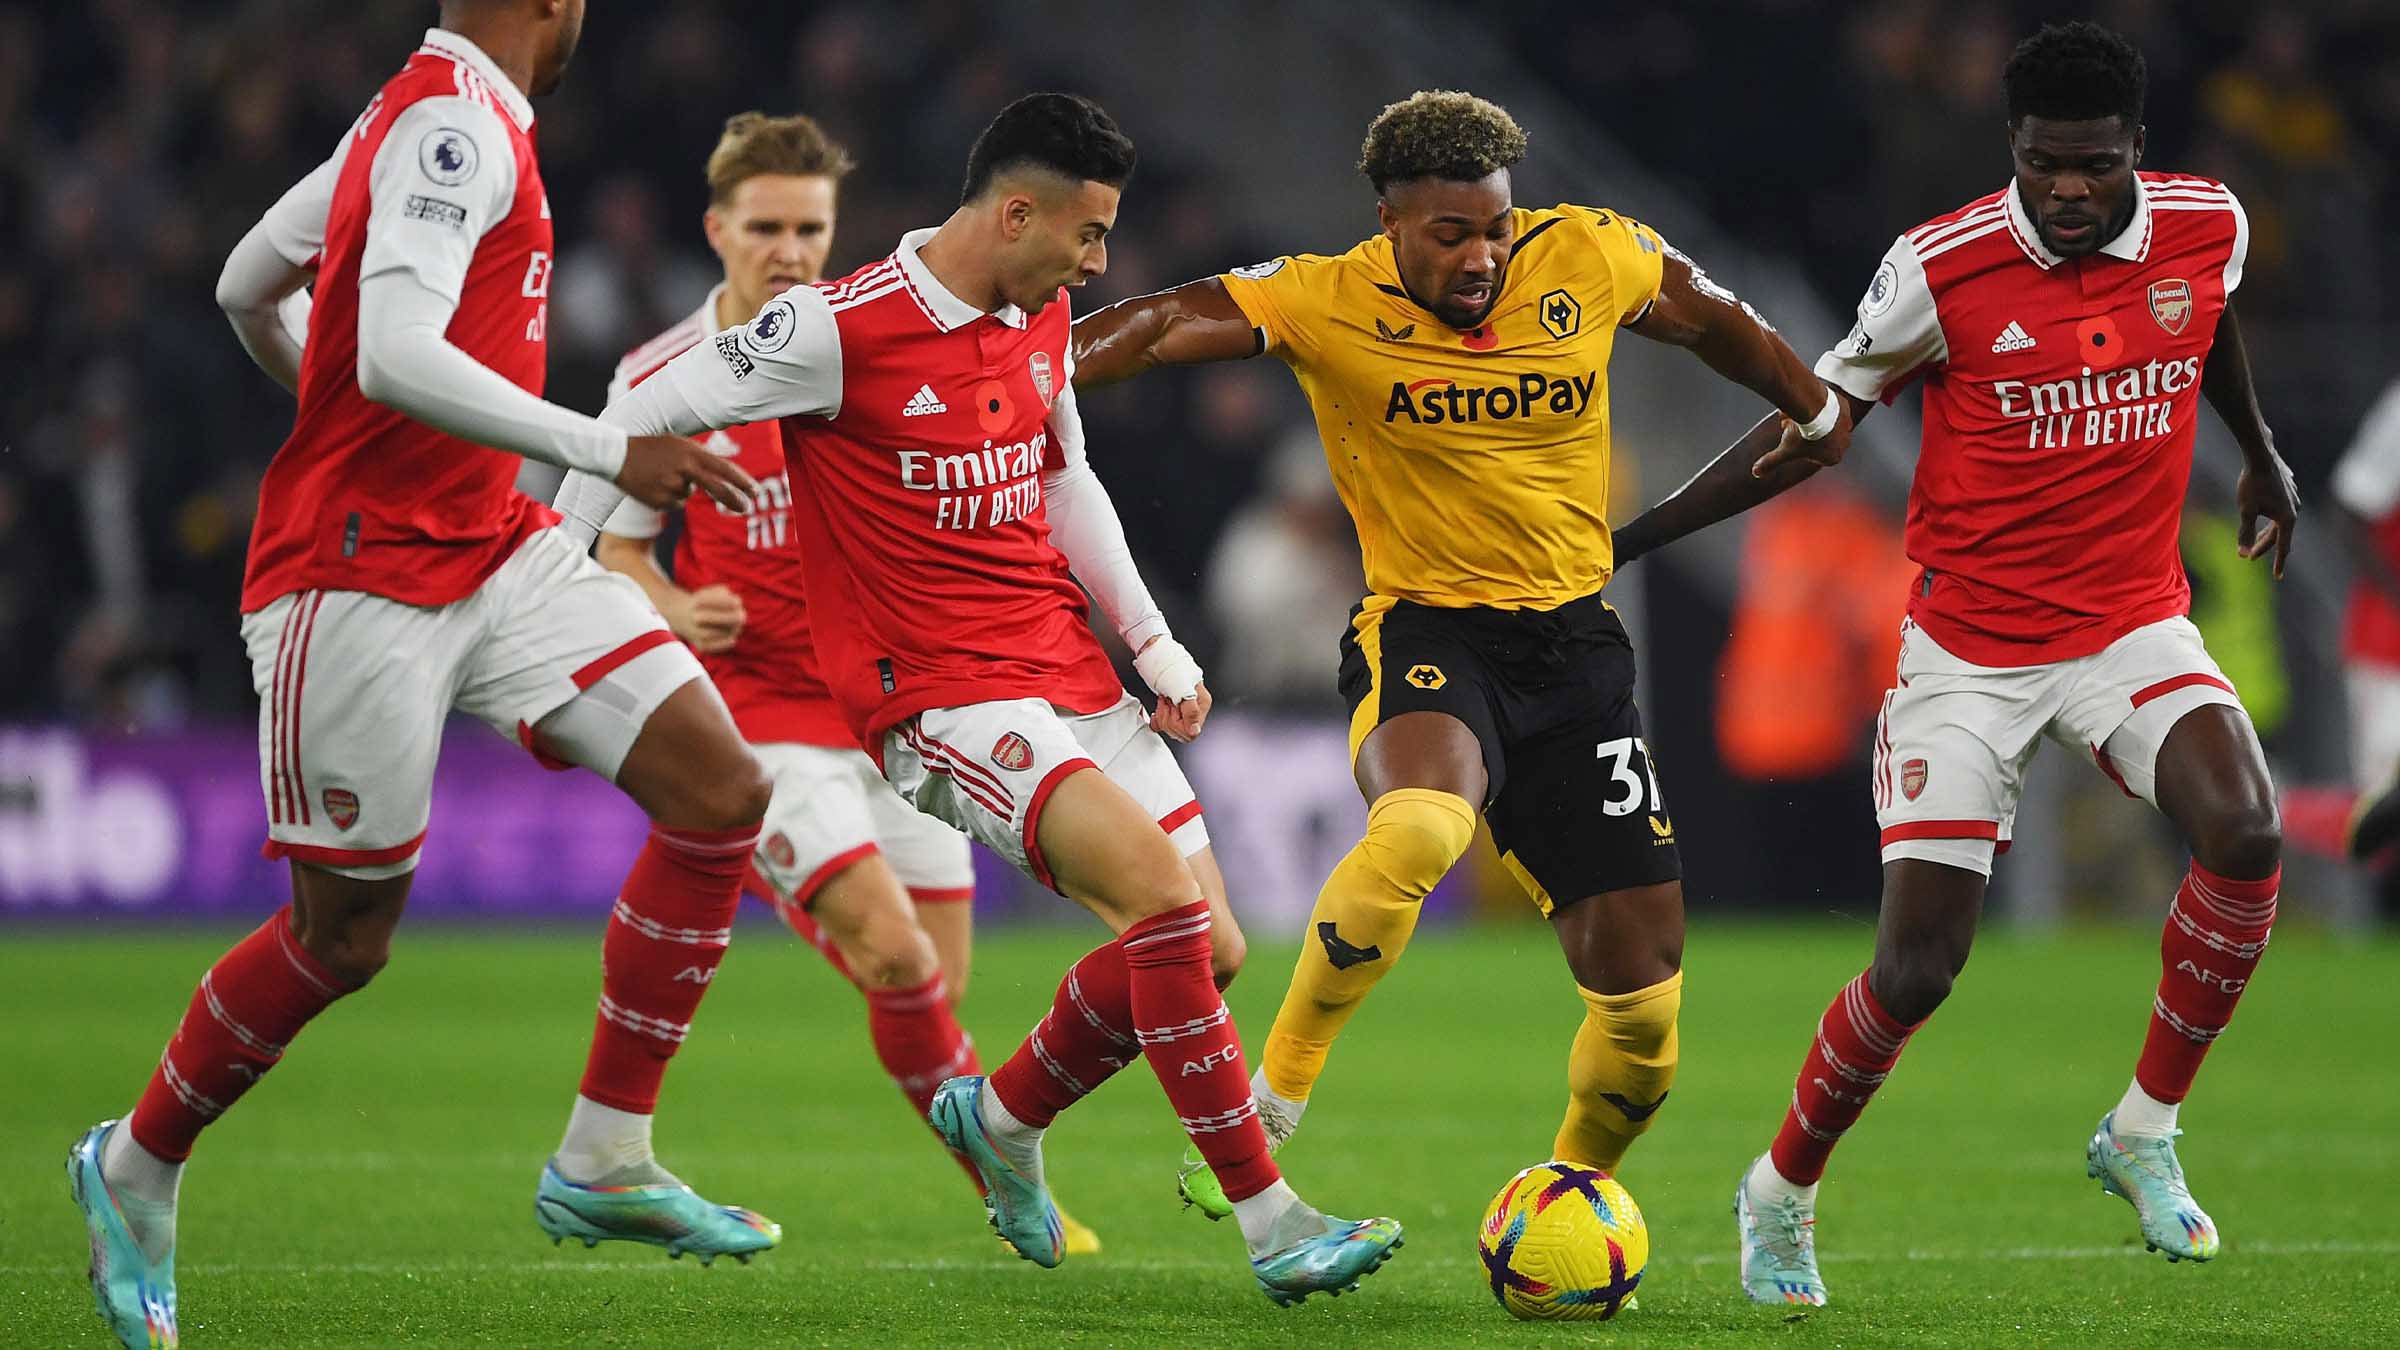 Arsenal vs. Wolverhampton live stream: TV channel, how to watch